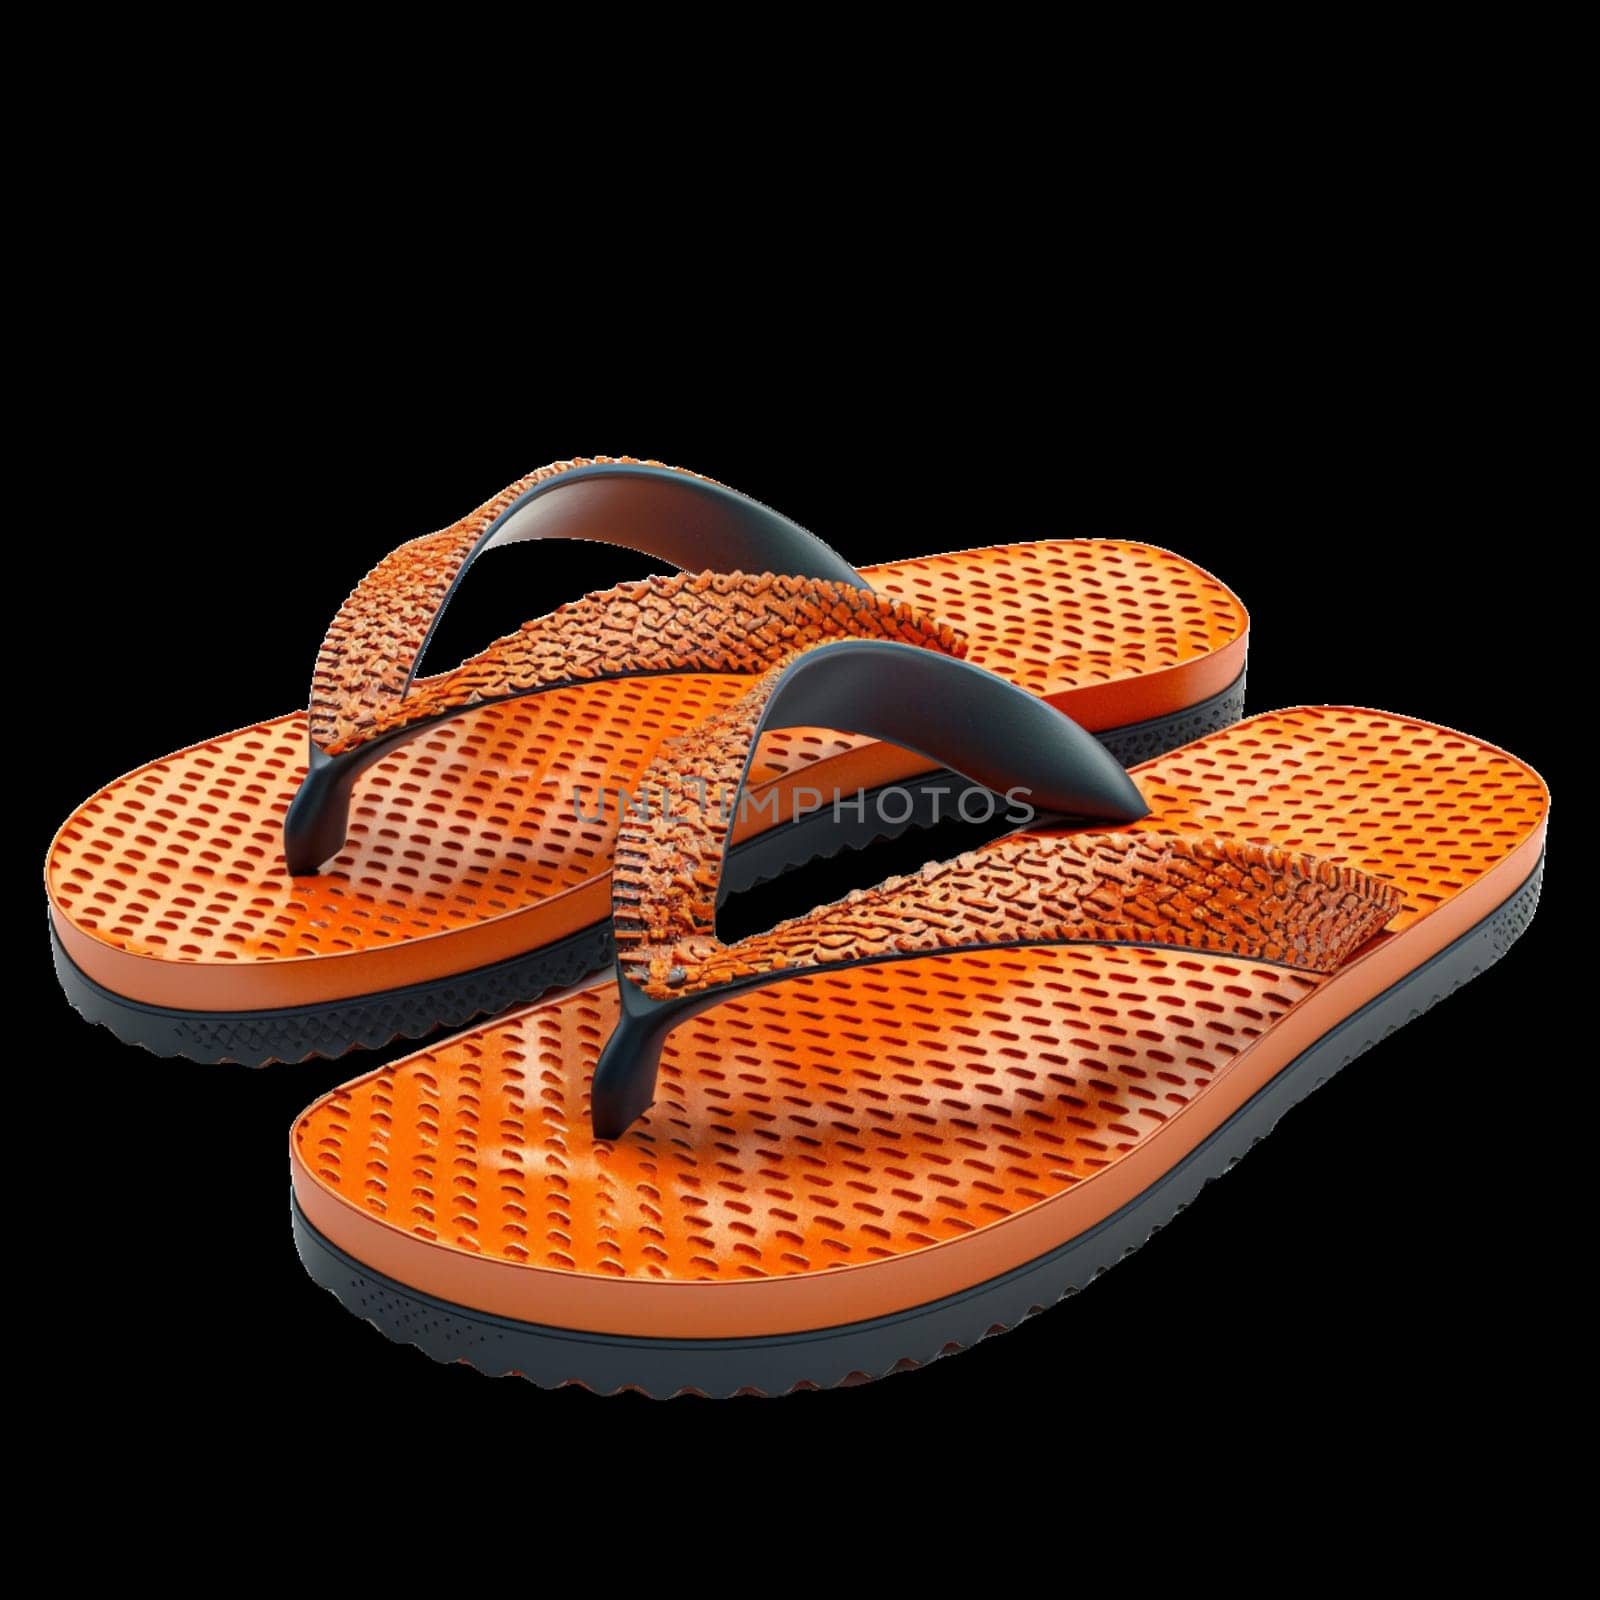 Flipflops Shoes Png Isolated on Transparent Background. Cutout Design Element. by iliris